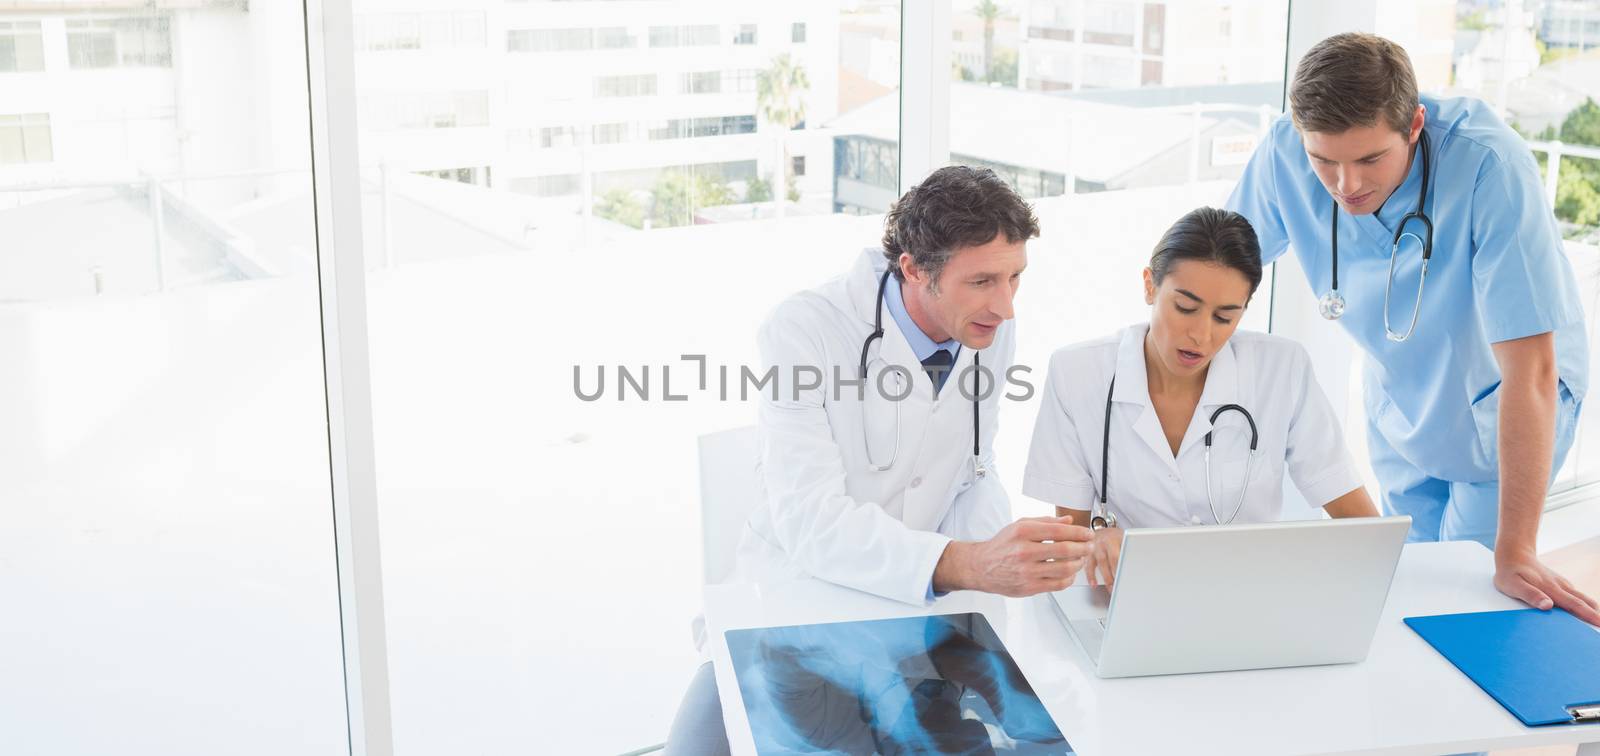 Team of doctors working on laptop computer in medical office